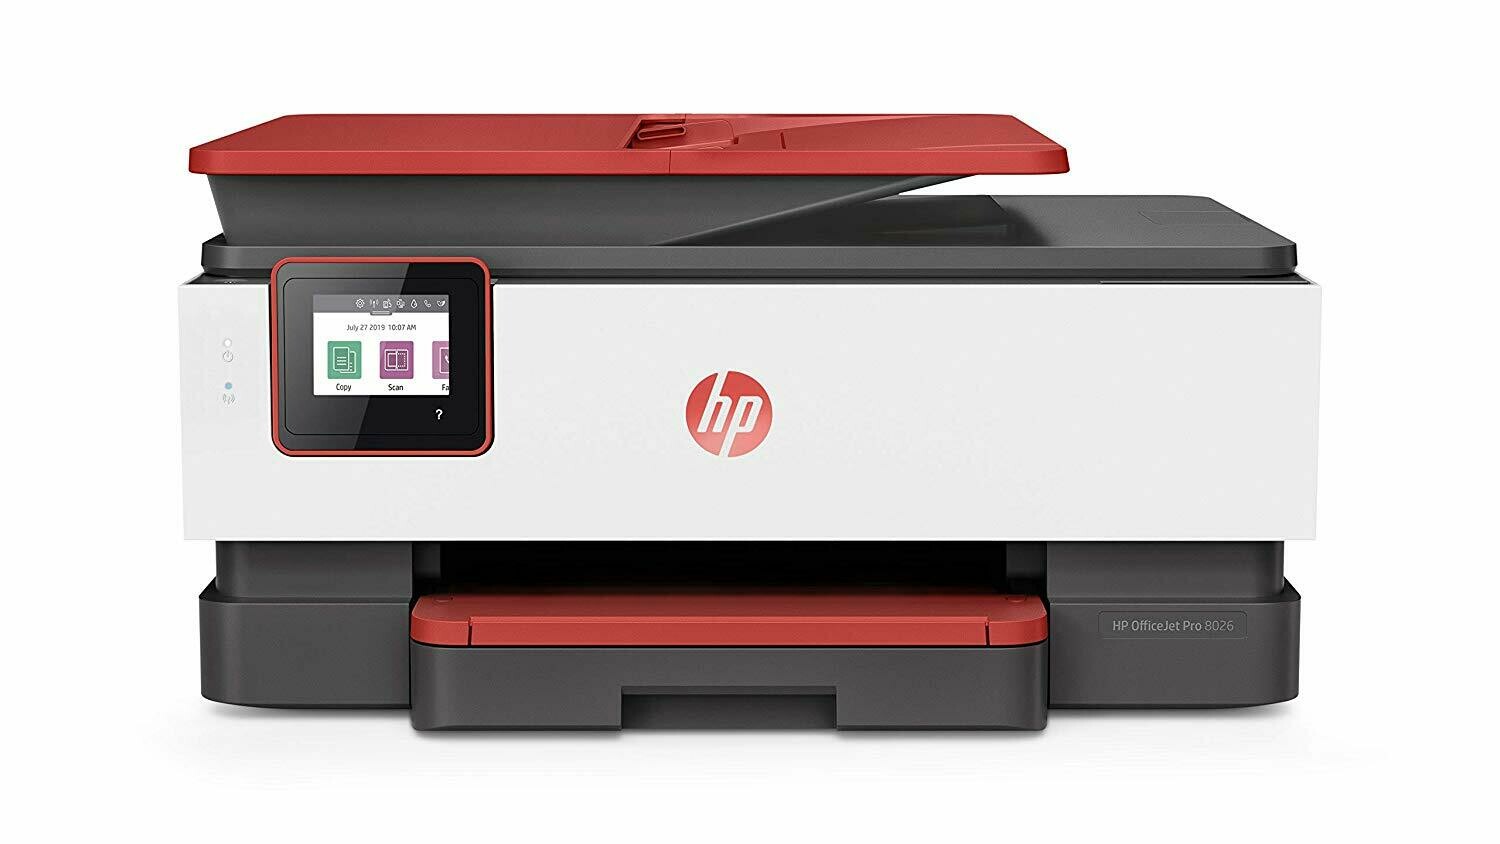 HP OfficeJet Pro 8026 All-in-One Colour Printer